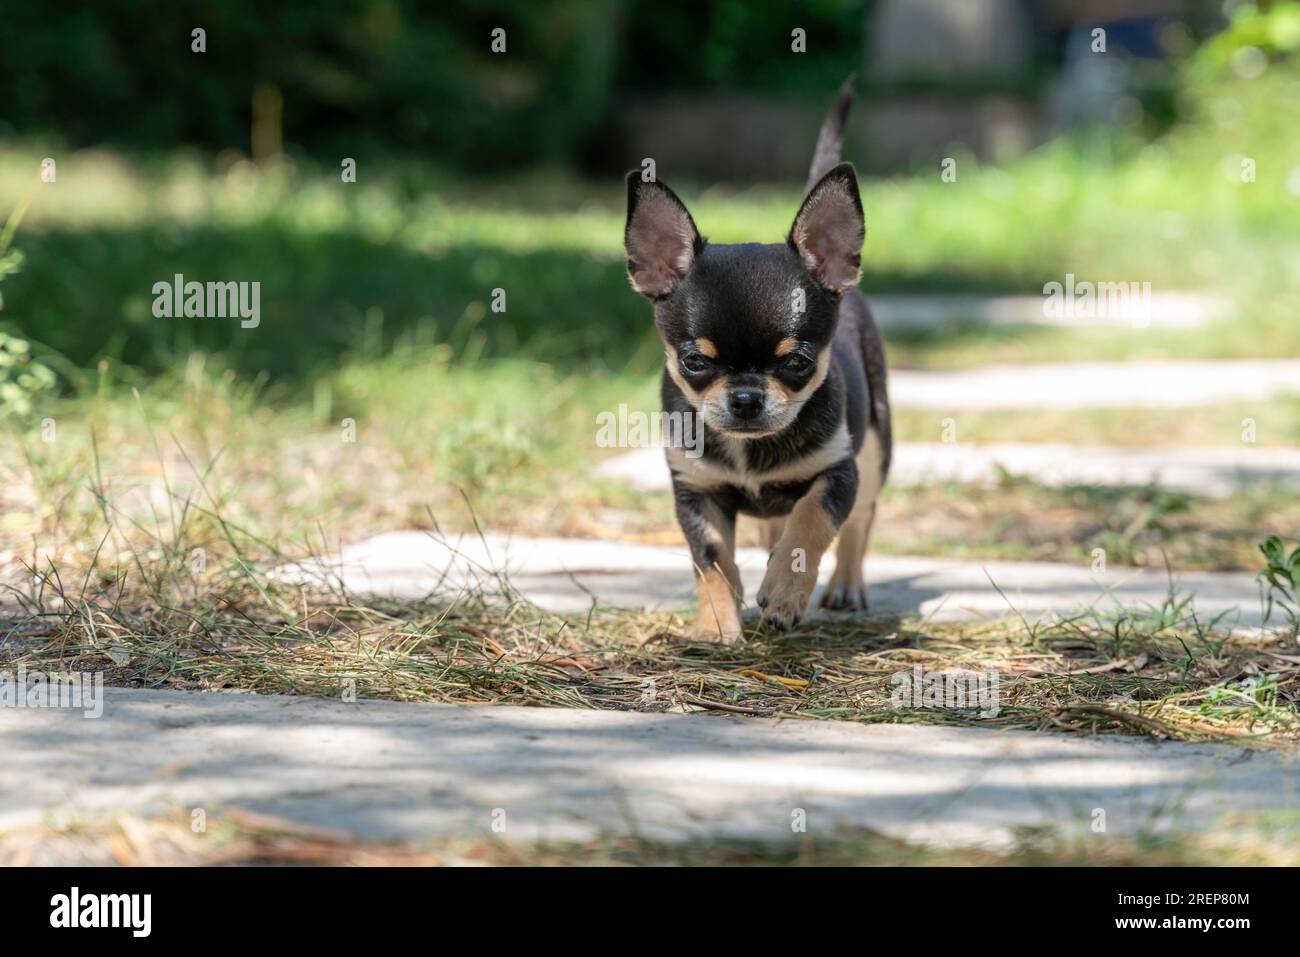 Brown and black Chihuahua puppy walking Stock Photo